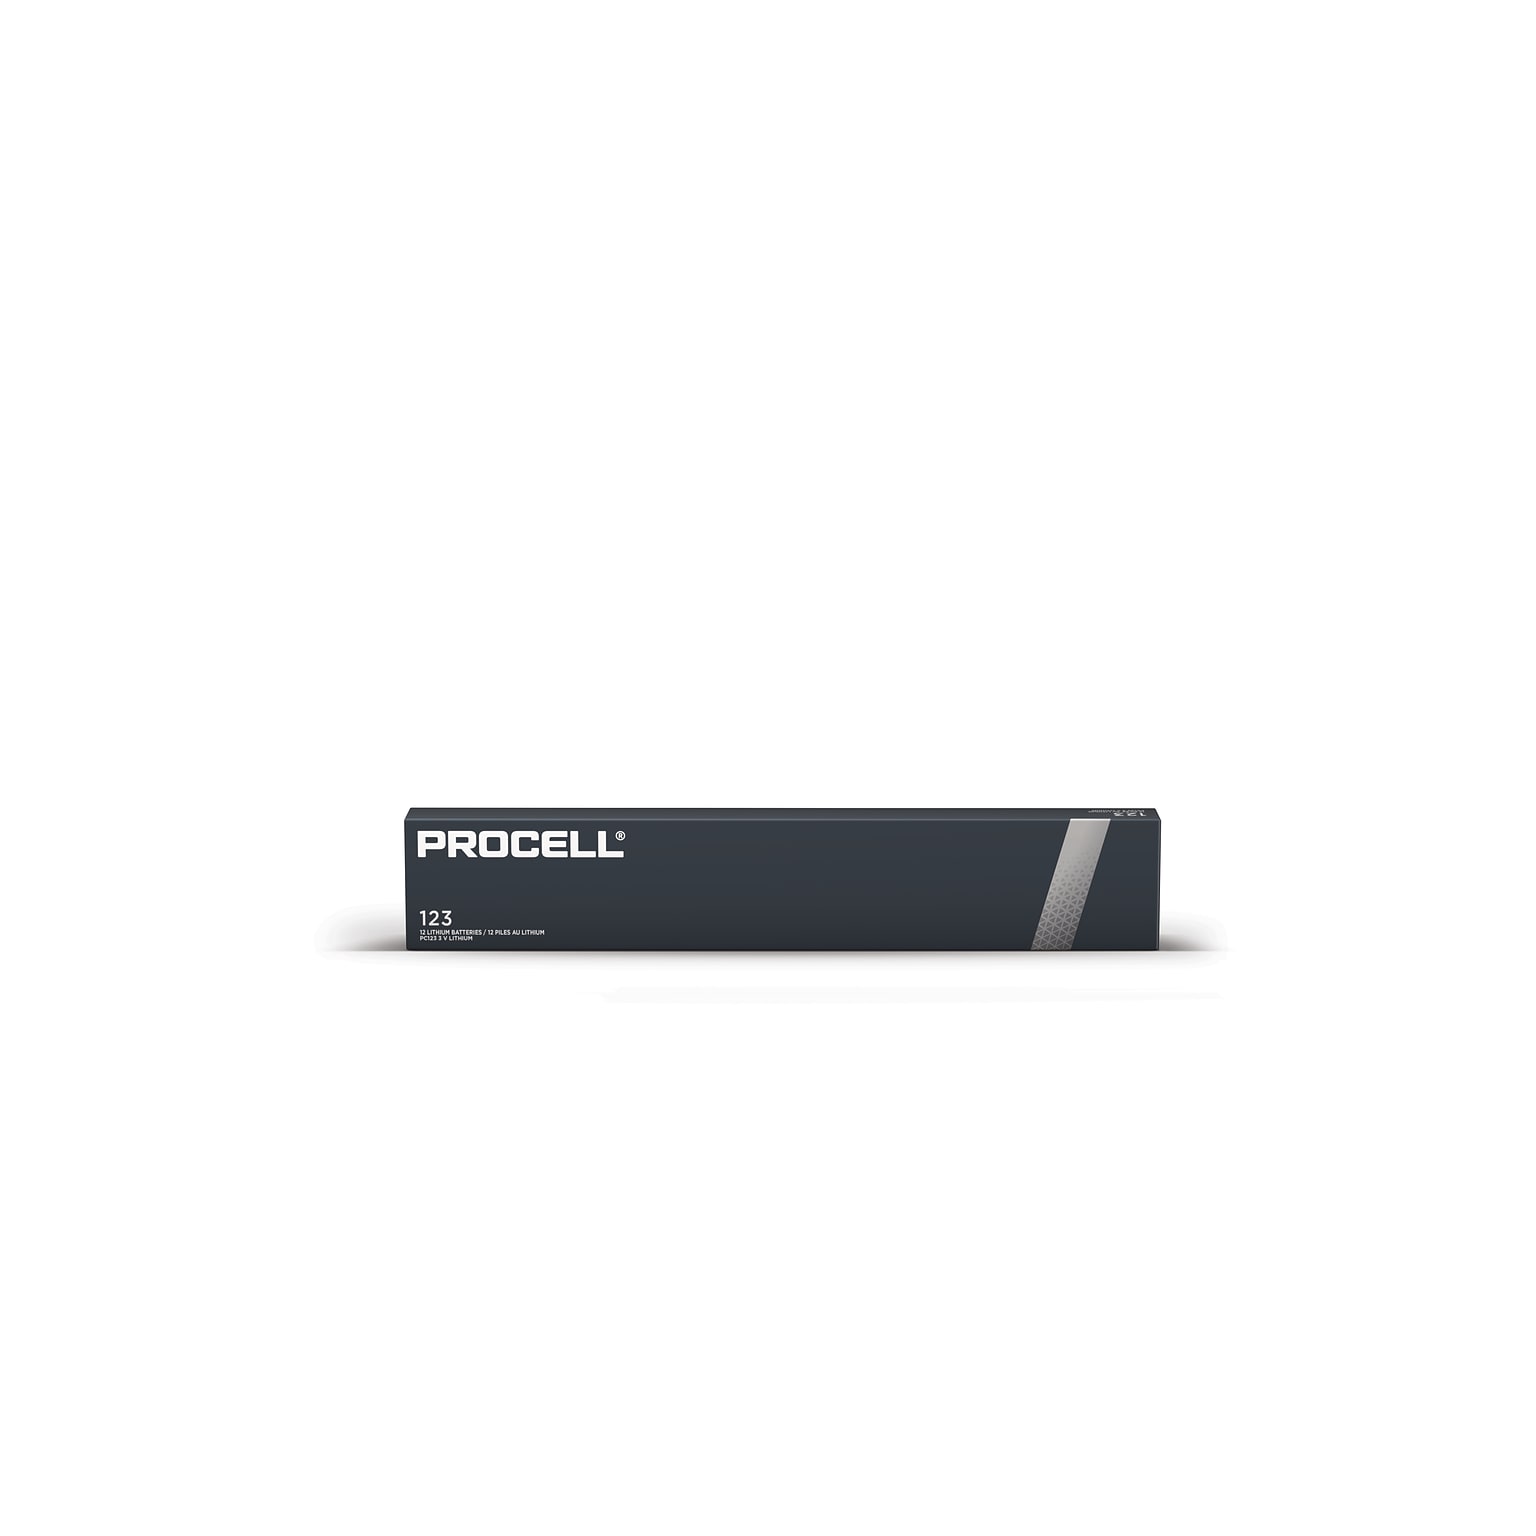 Duracell Procell 123 Lithium Battery, 12/Pack (PL123BKD)